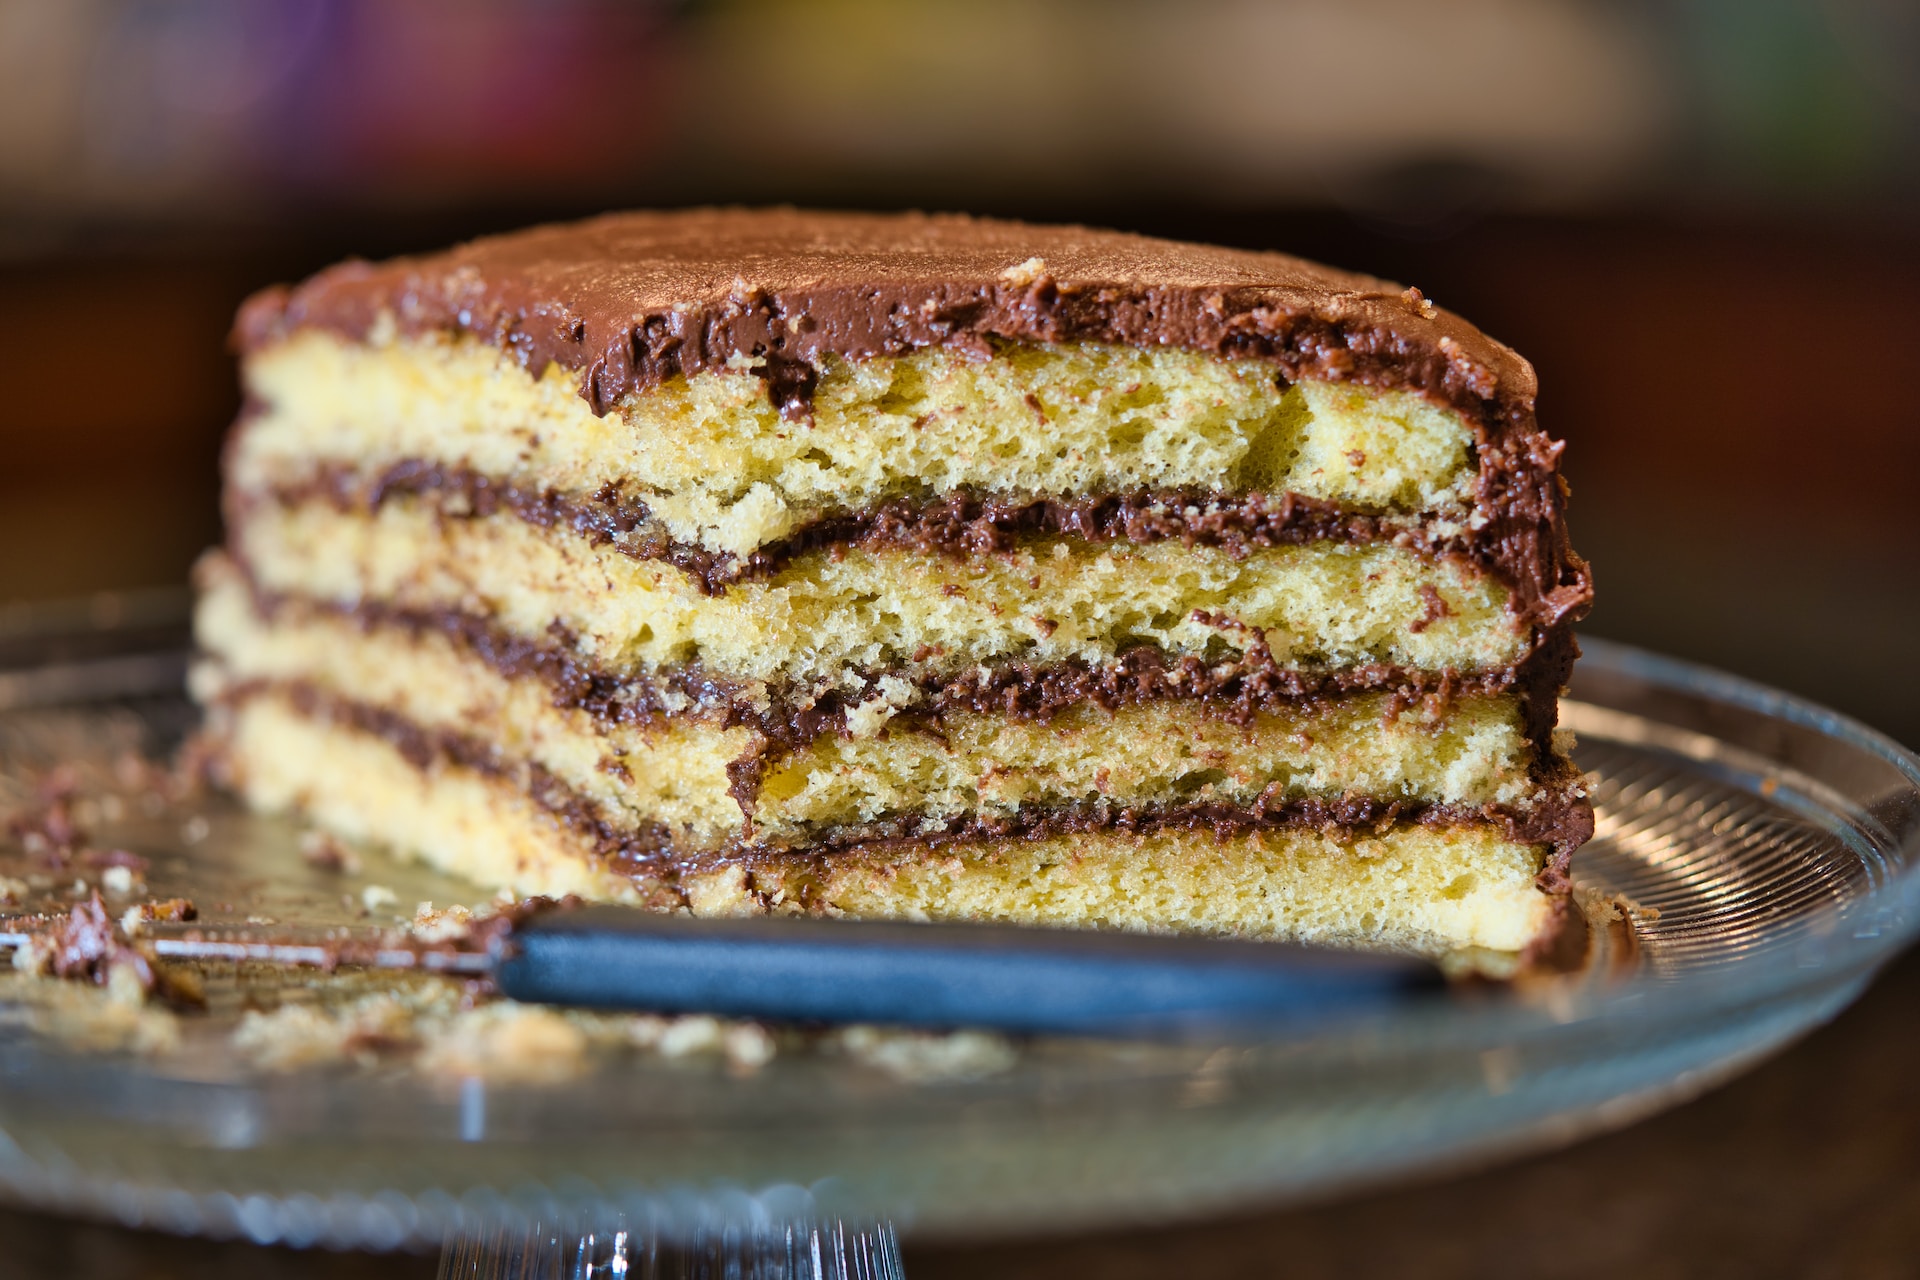 description: a close-up, cutaway view of a layered chocolate cake. Photo by Clint Patterson on Unsplash.